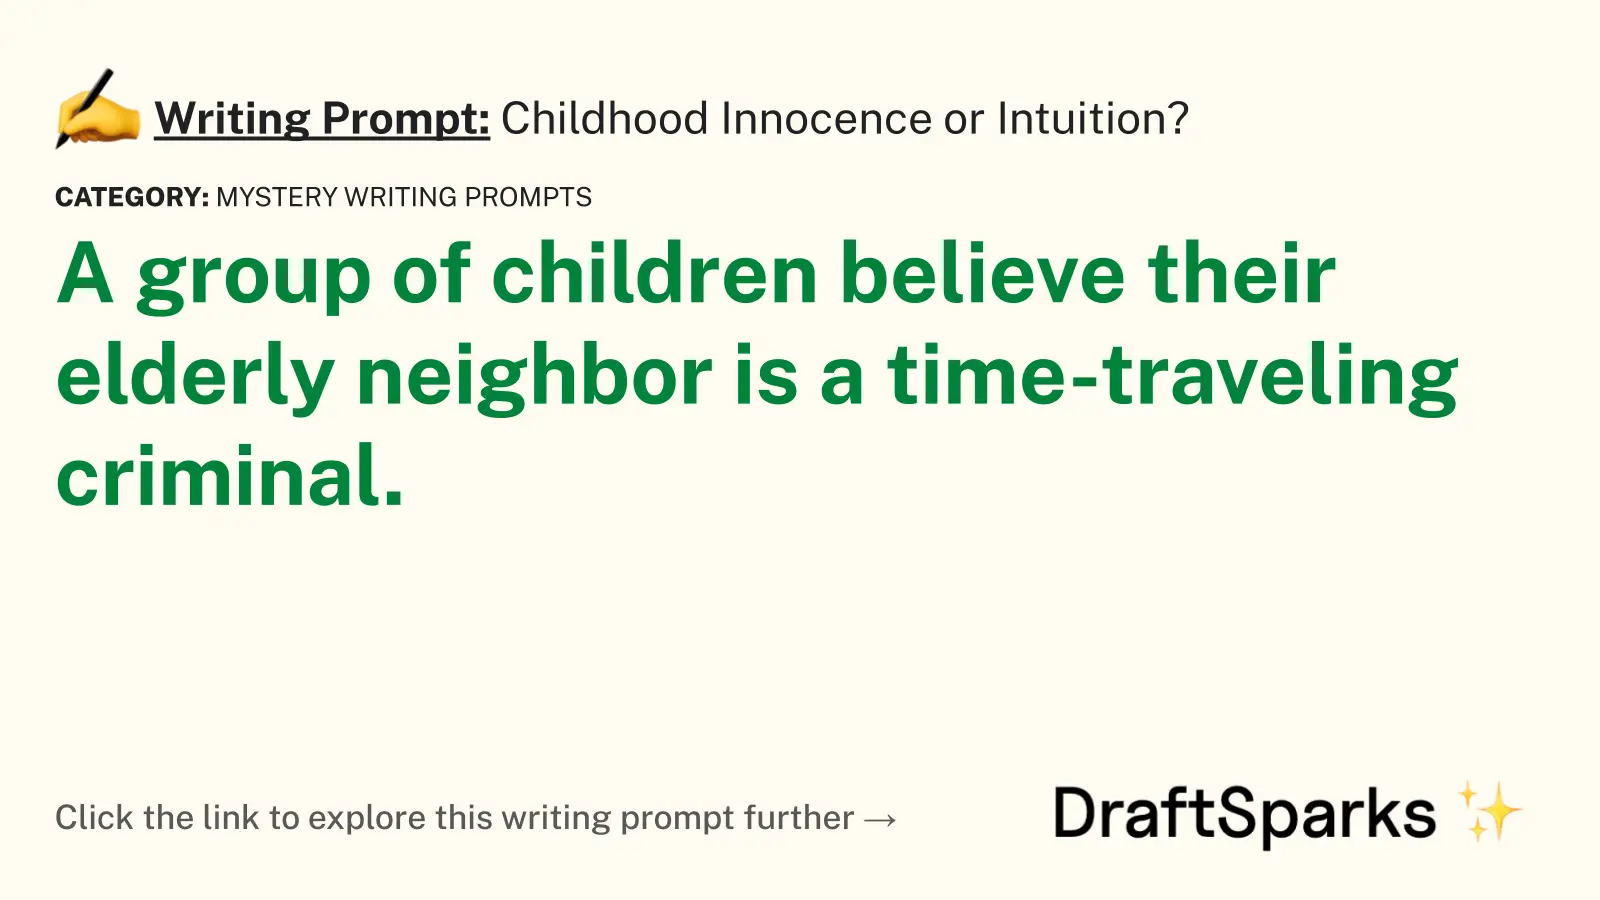 Childhood Innocence or Intuition?